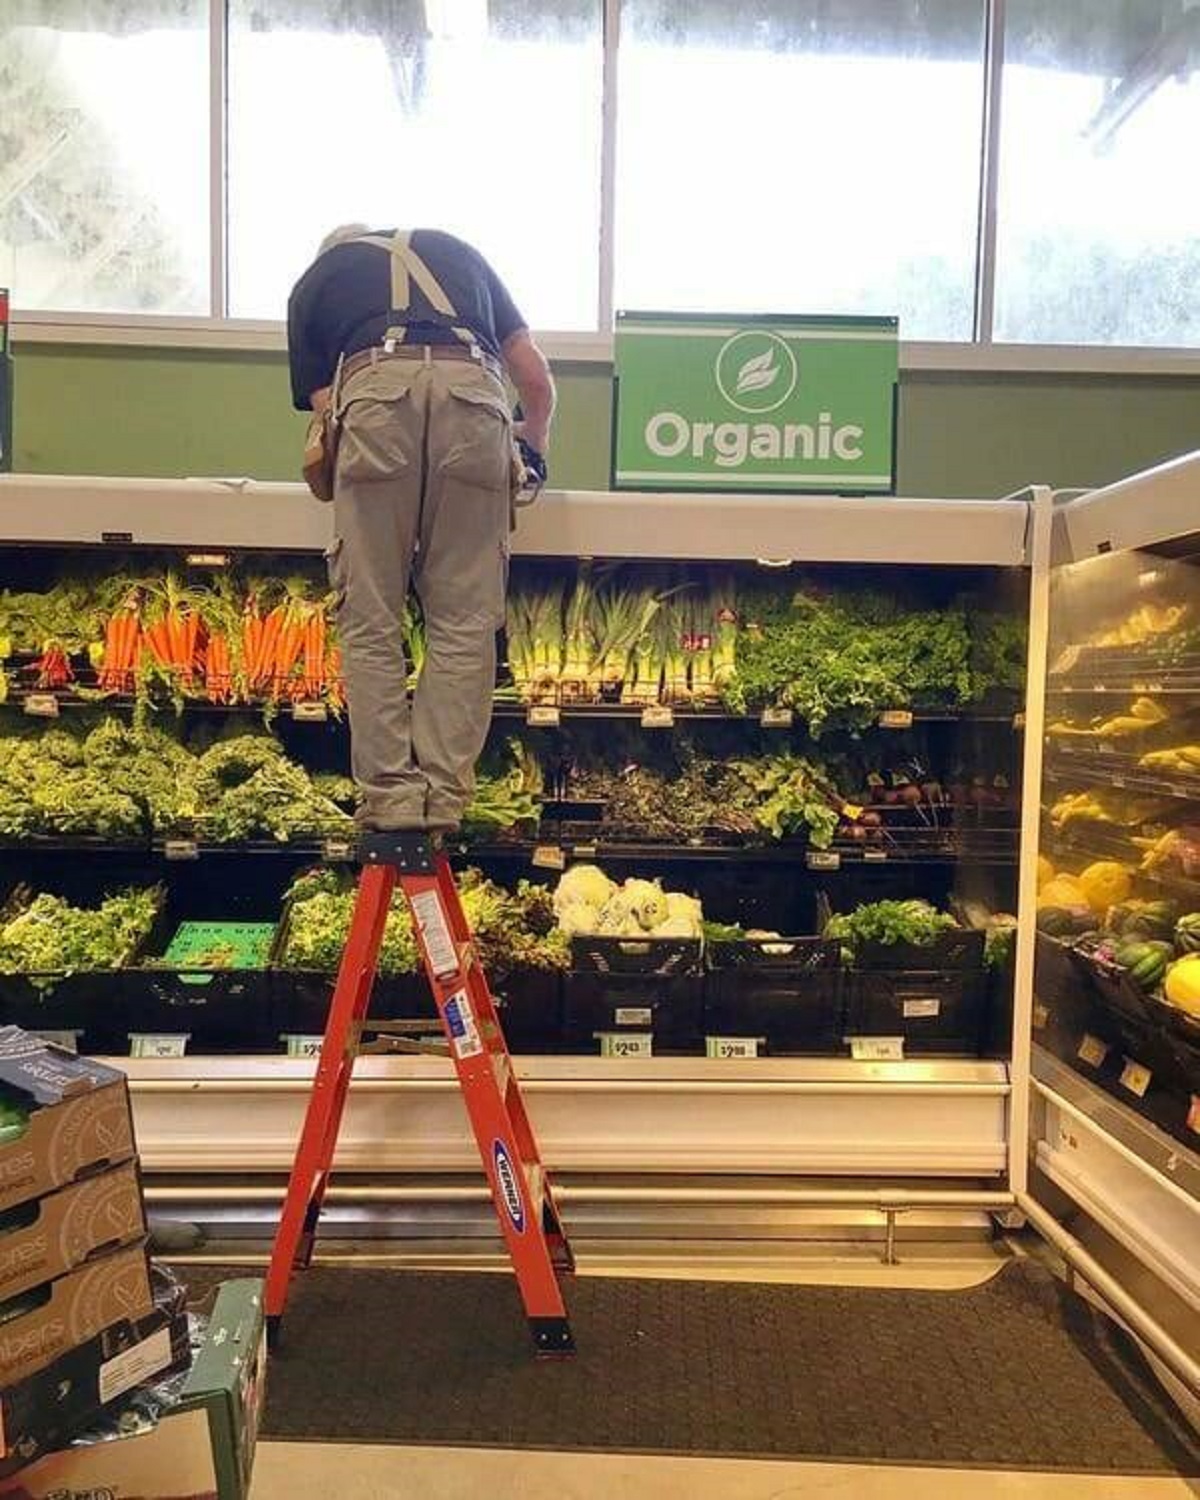 “Where vegetables comes from.”